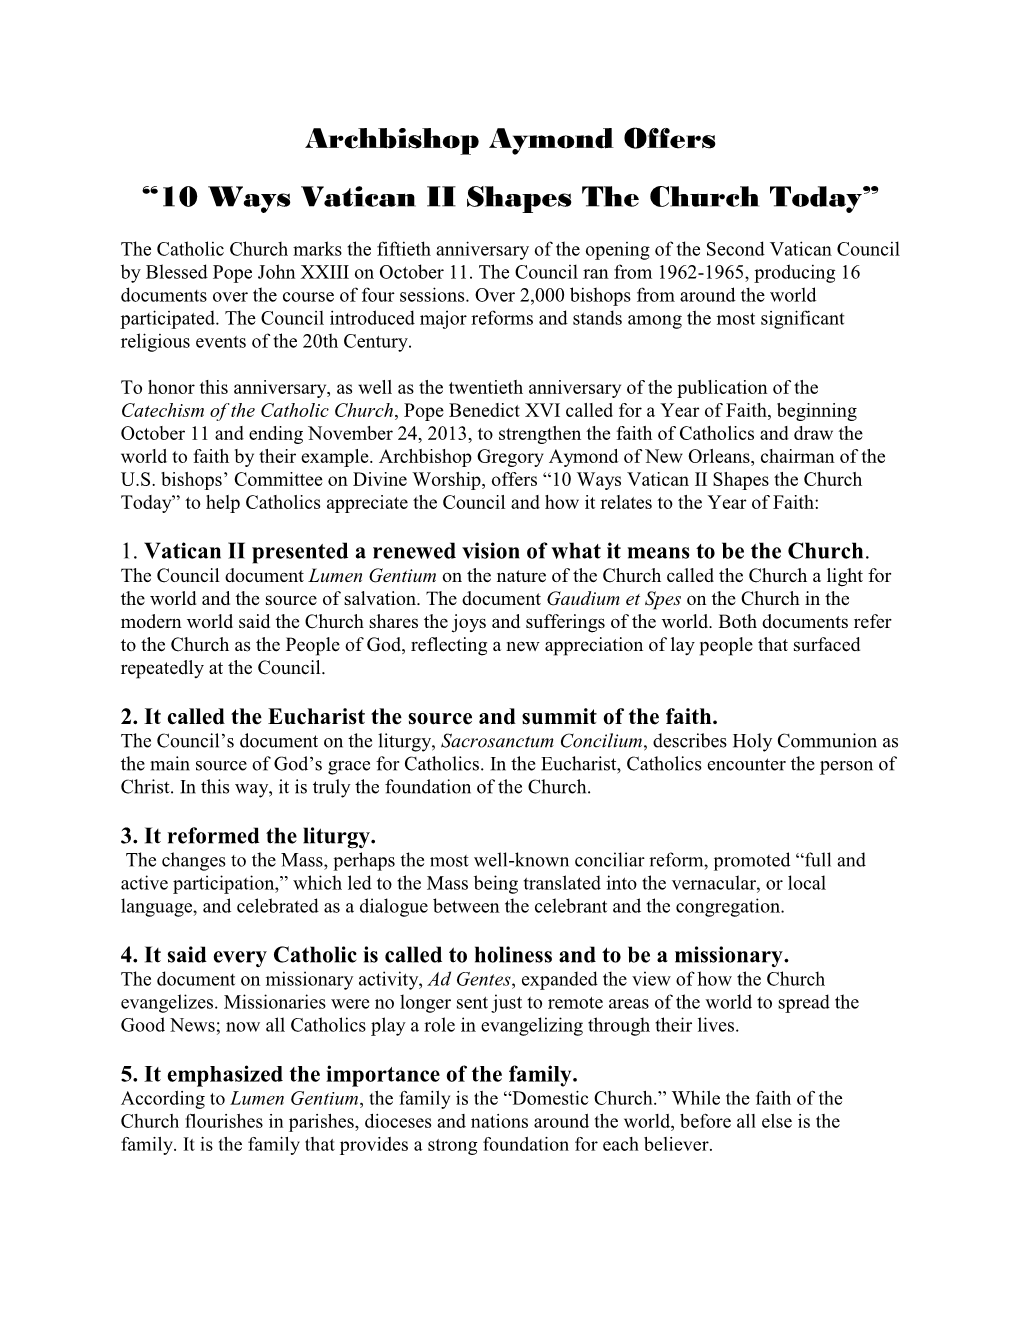 10 Ways Vatican II Shapes the Church Today”